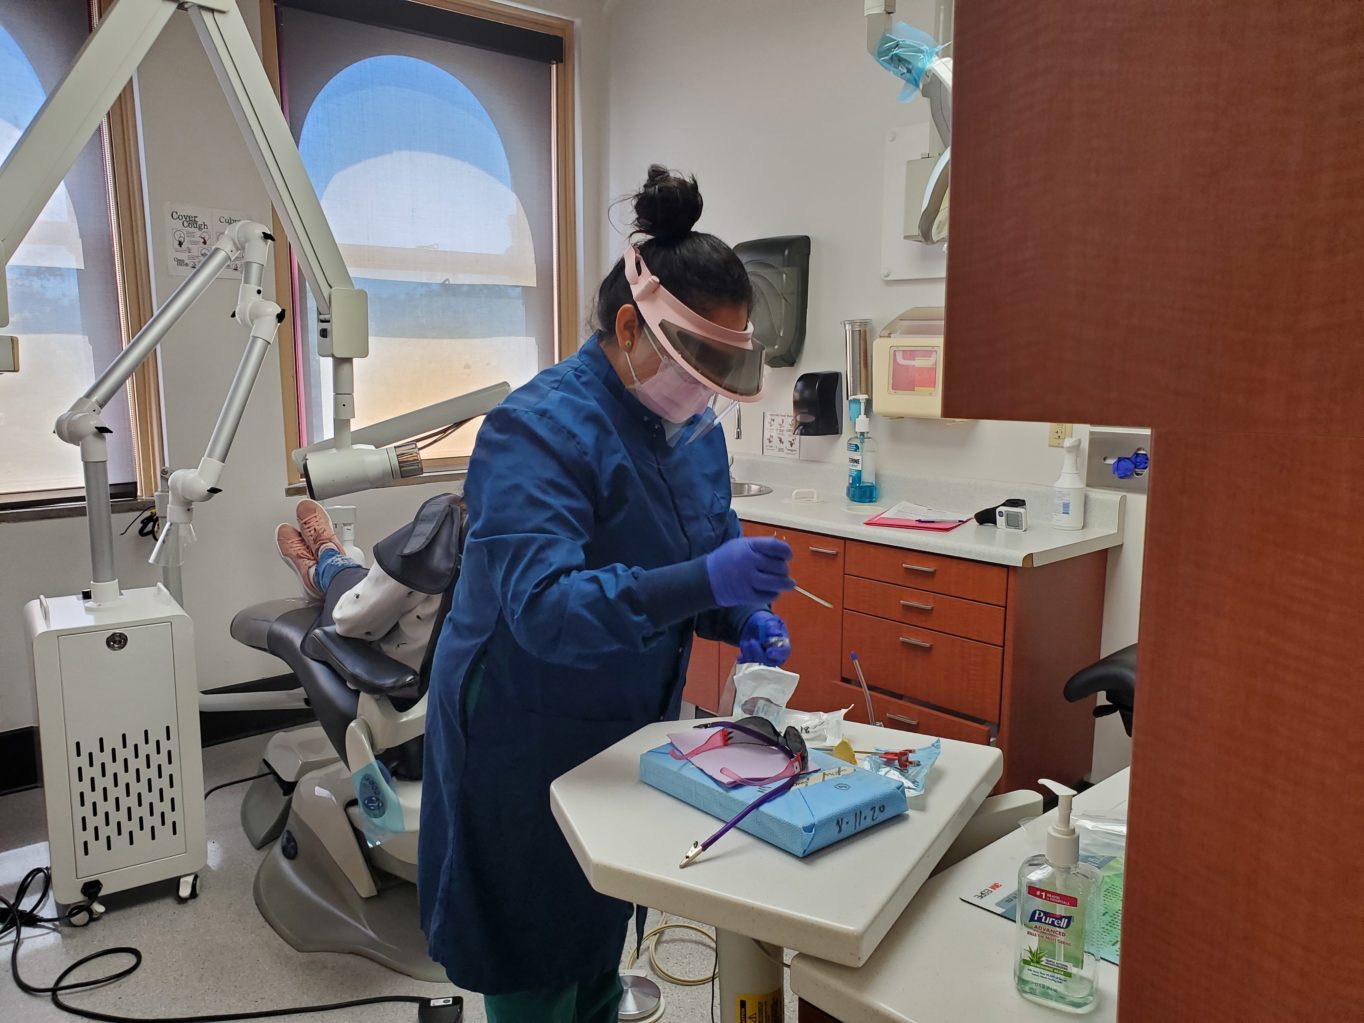 A dental hygienist in a blue coat and mask working on a dental treatment